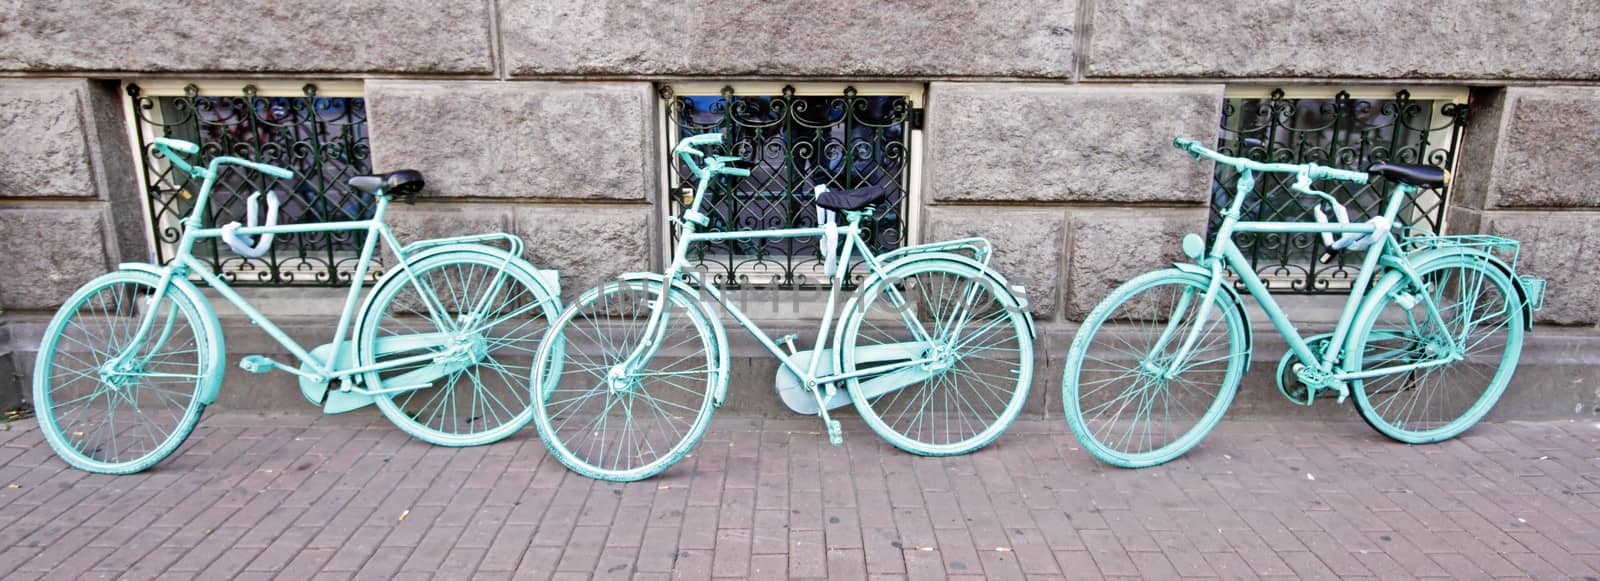 Three green bicycles against a wall in Amsterdam Netherlands by devy